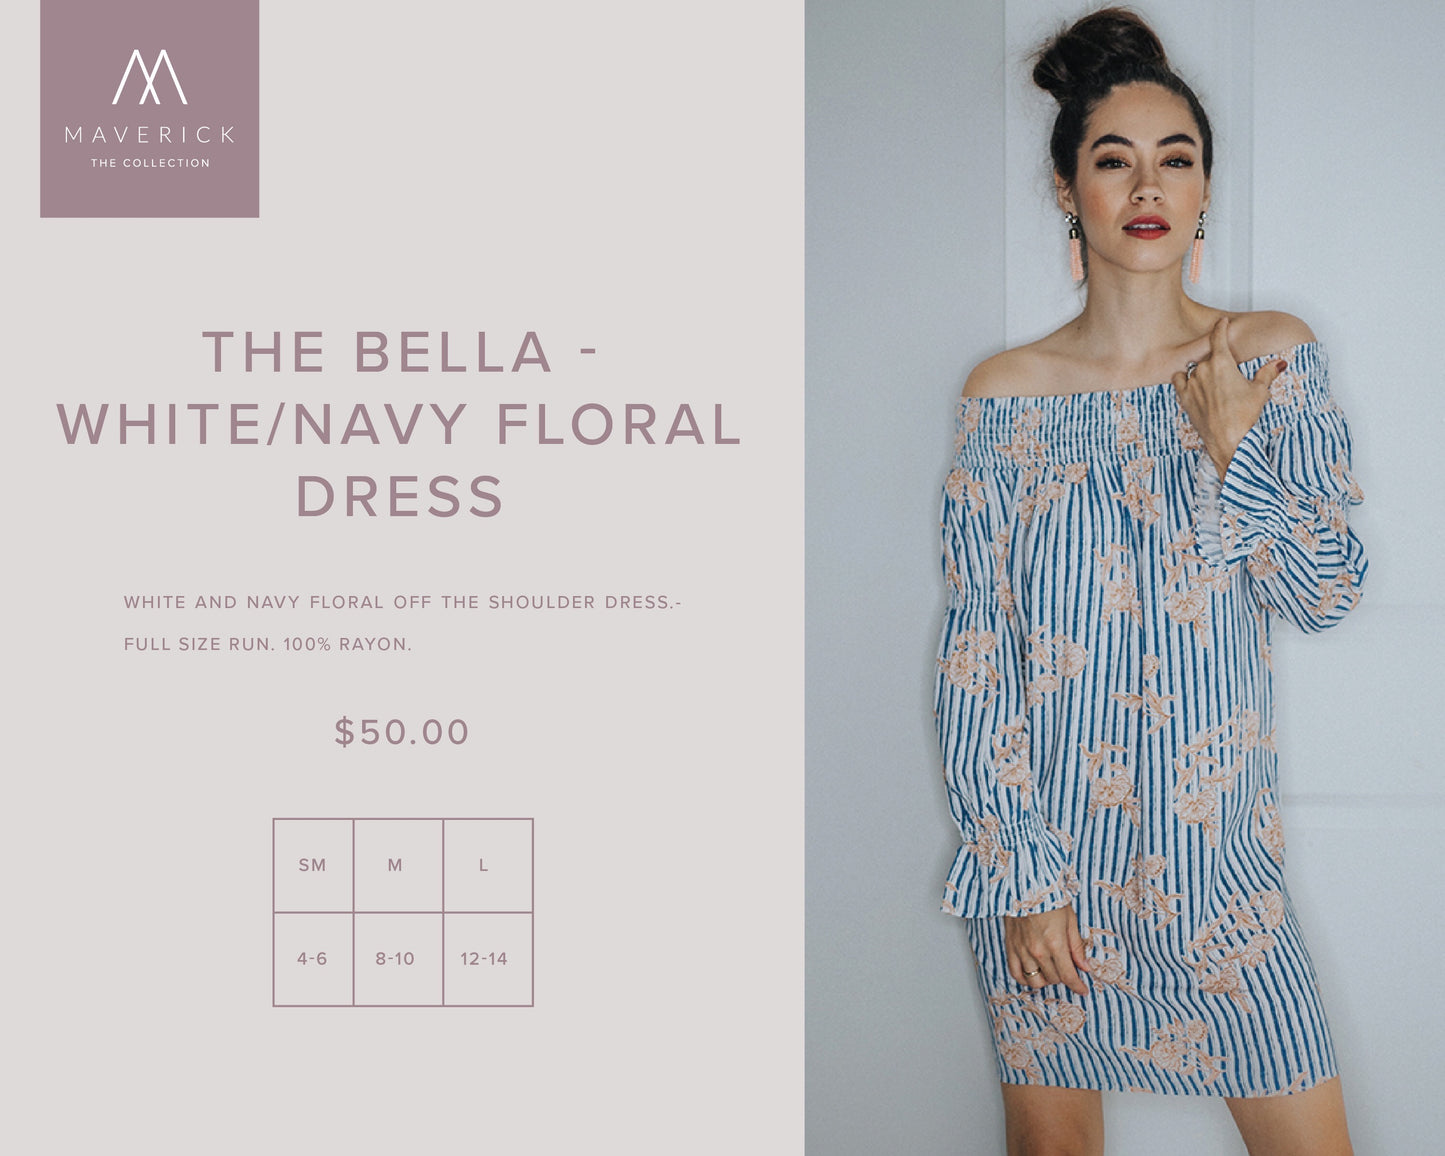 Bella - White and Navy Floral Dress